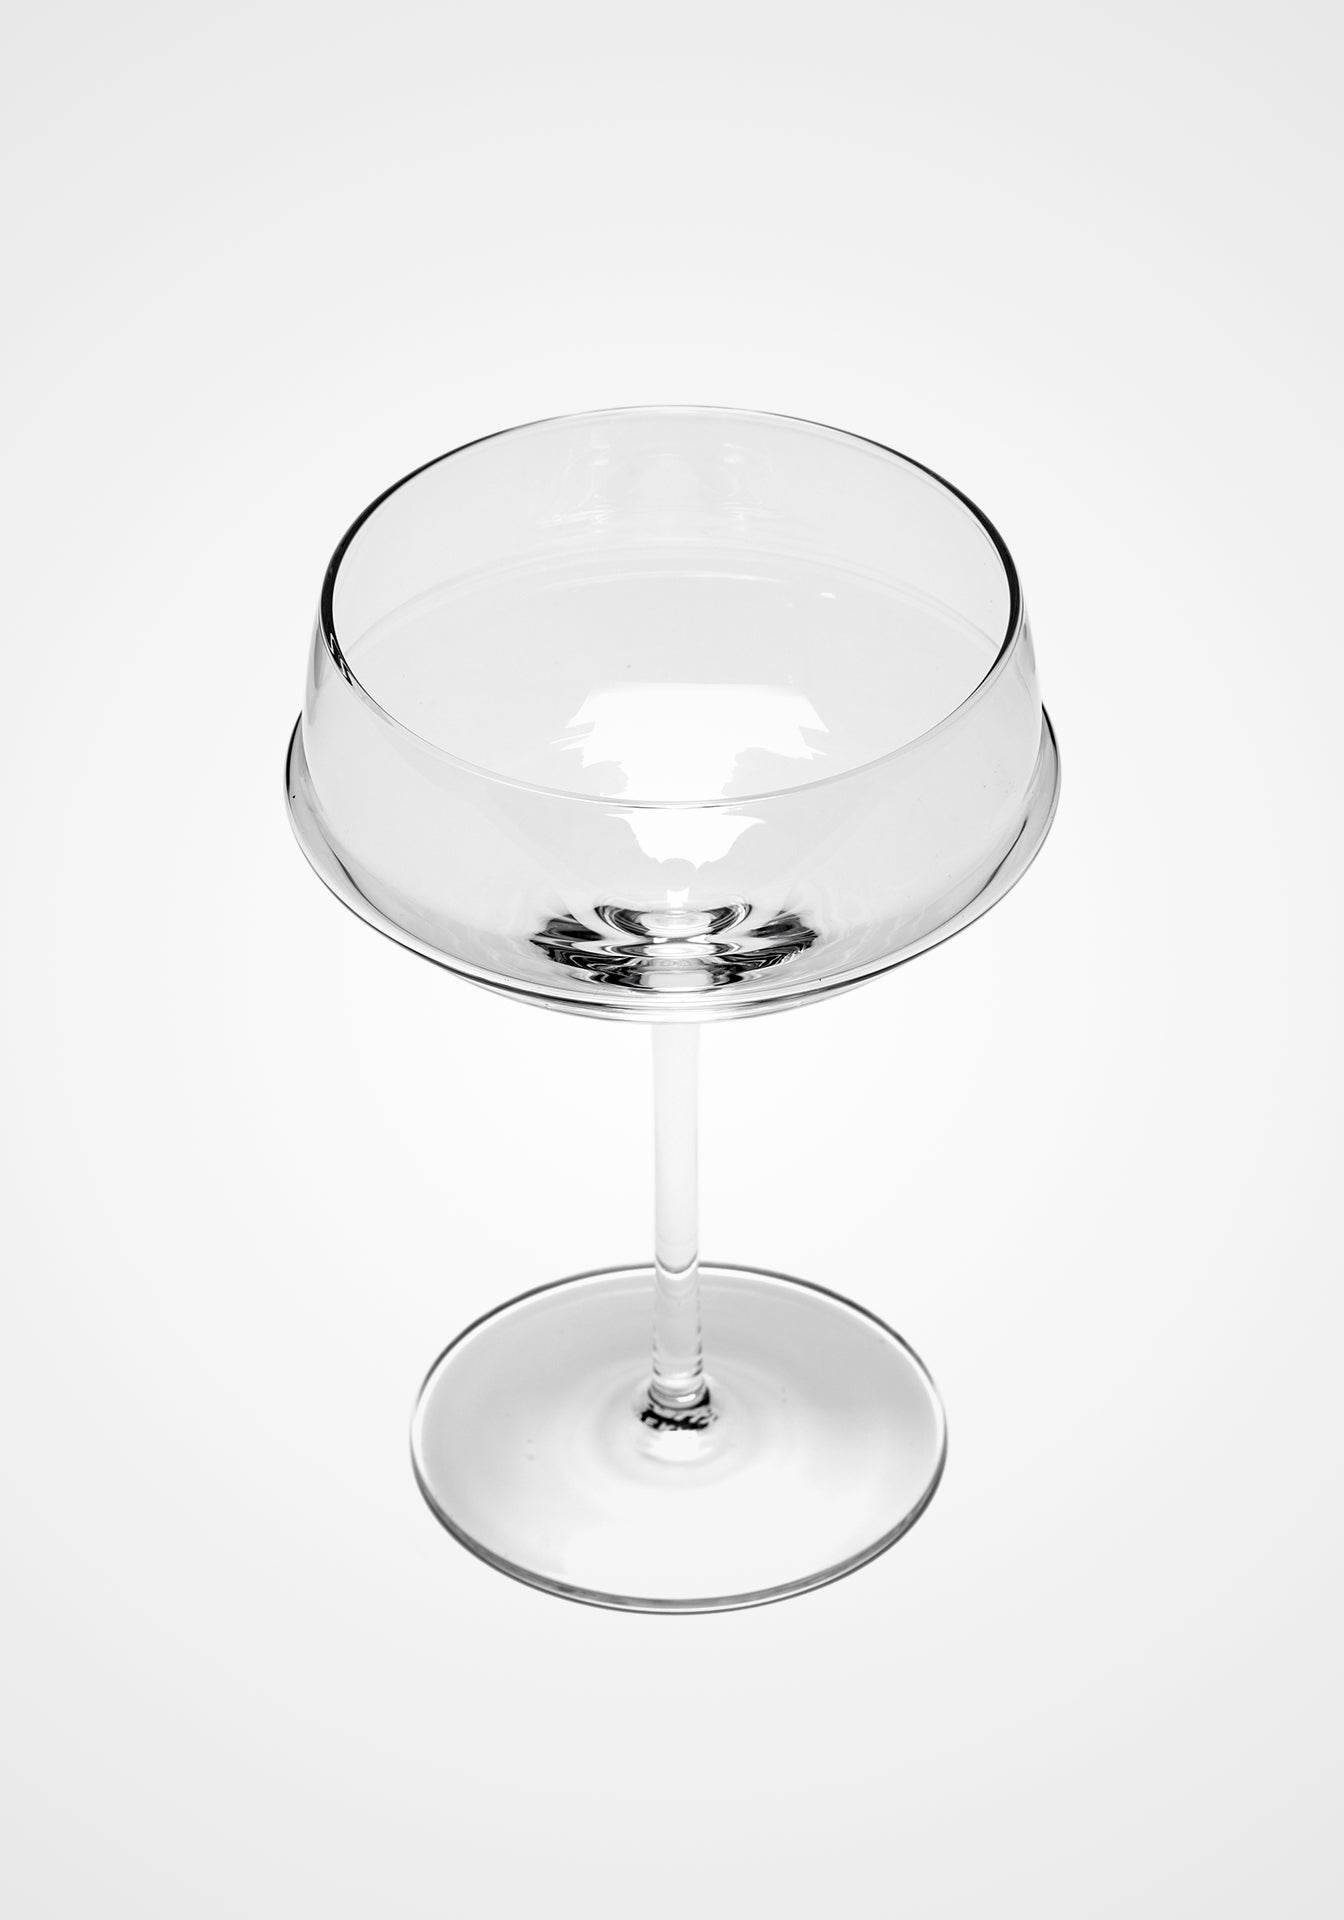 Kelly Wearstler Dune Champagne Coupe, Set of 4